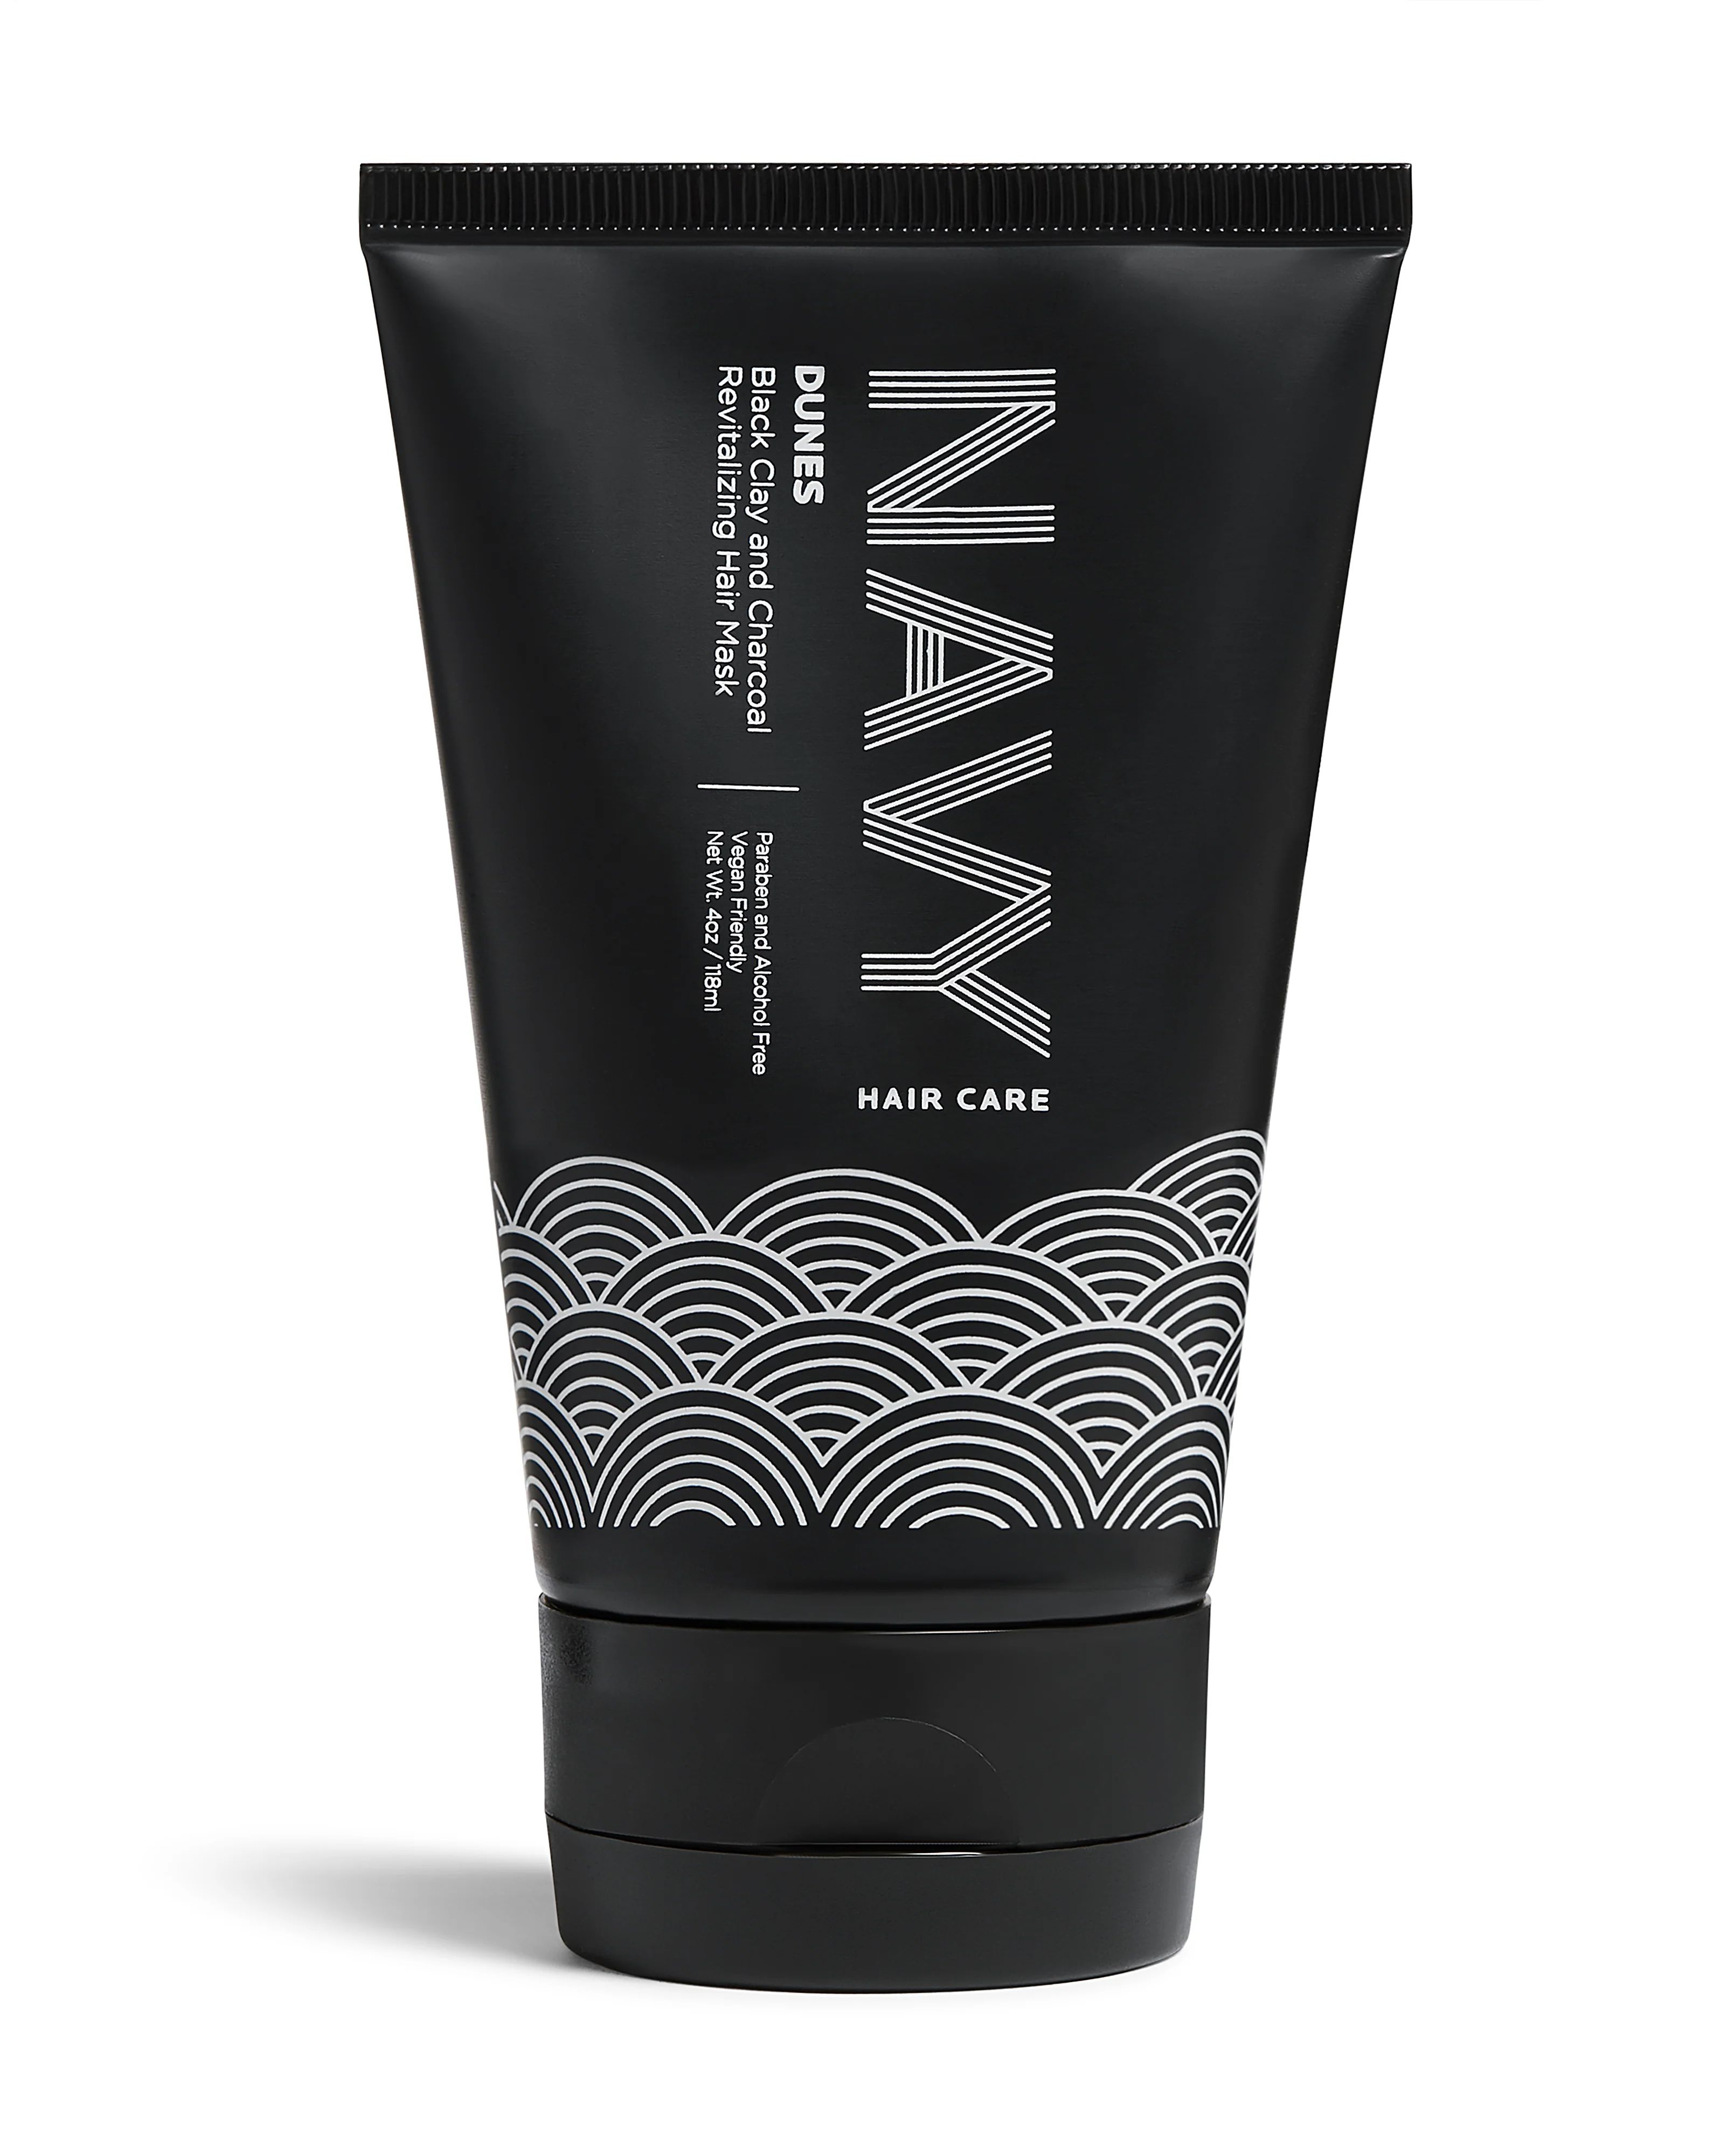 Dunes - Black Clay and Charcoal Revitalizing Hair Mask | NAVY Hair Care